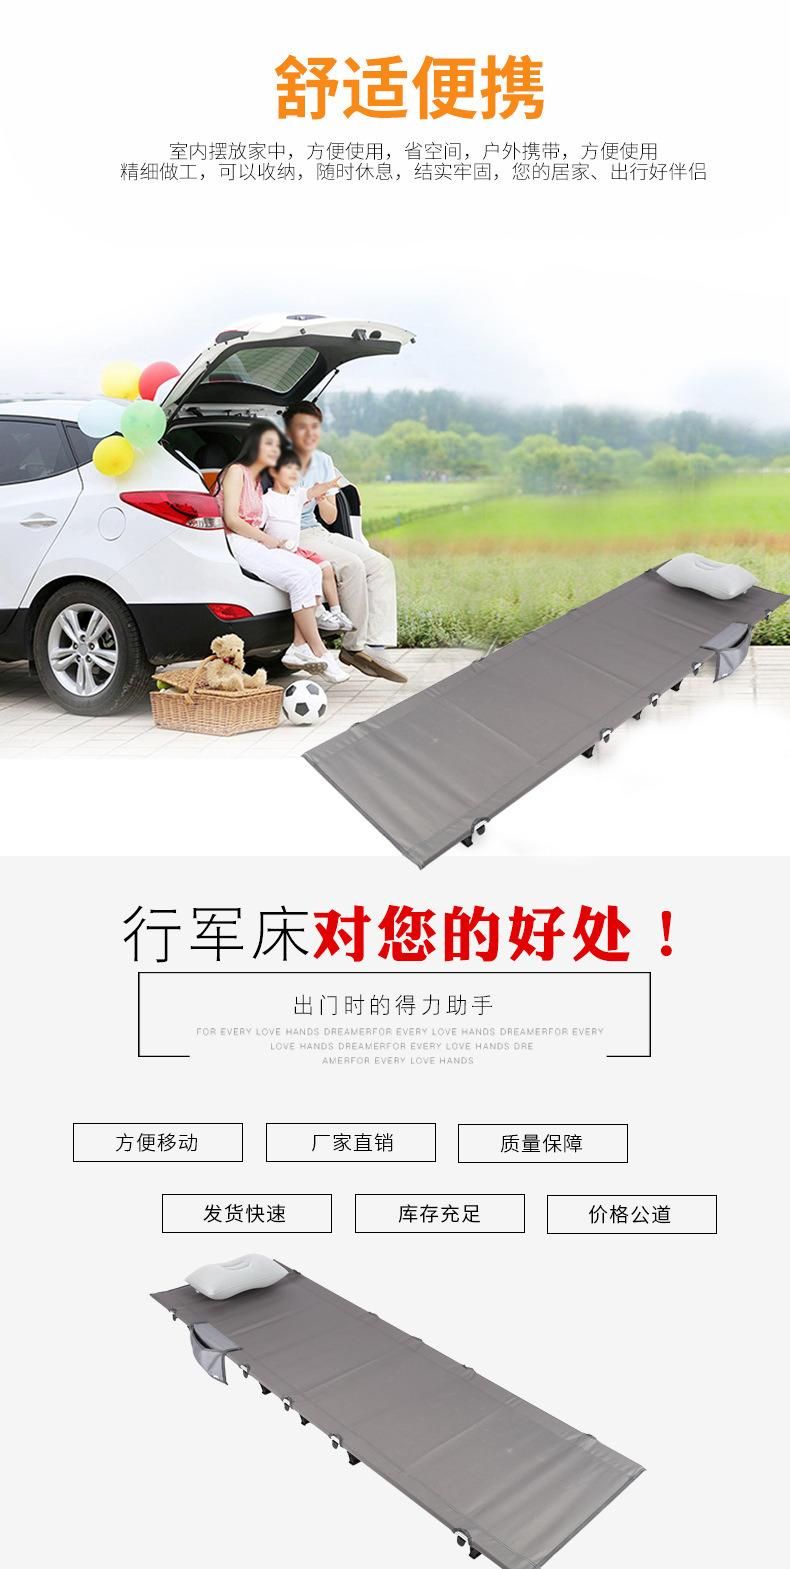 Portable Ultralight Folding Single Camping Cot Bed Travel Cot Tent Bed E Outdoor Camping Hiking Fishing Beds with Pillow